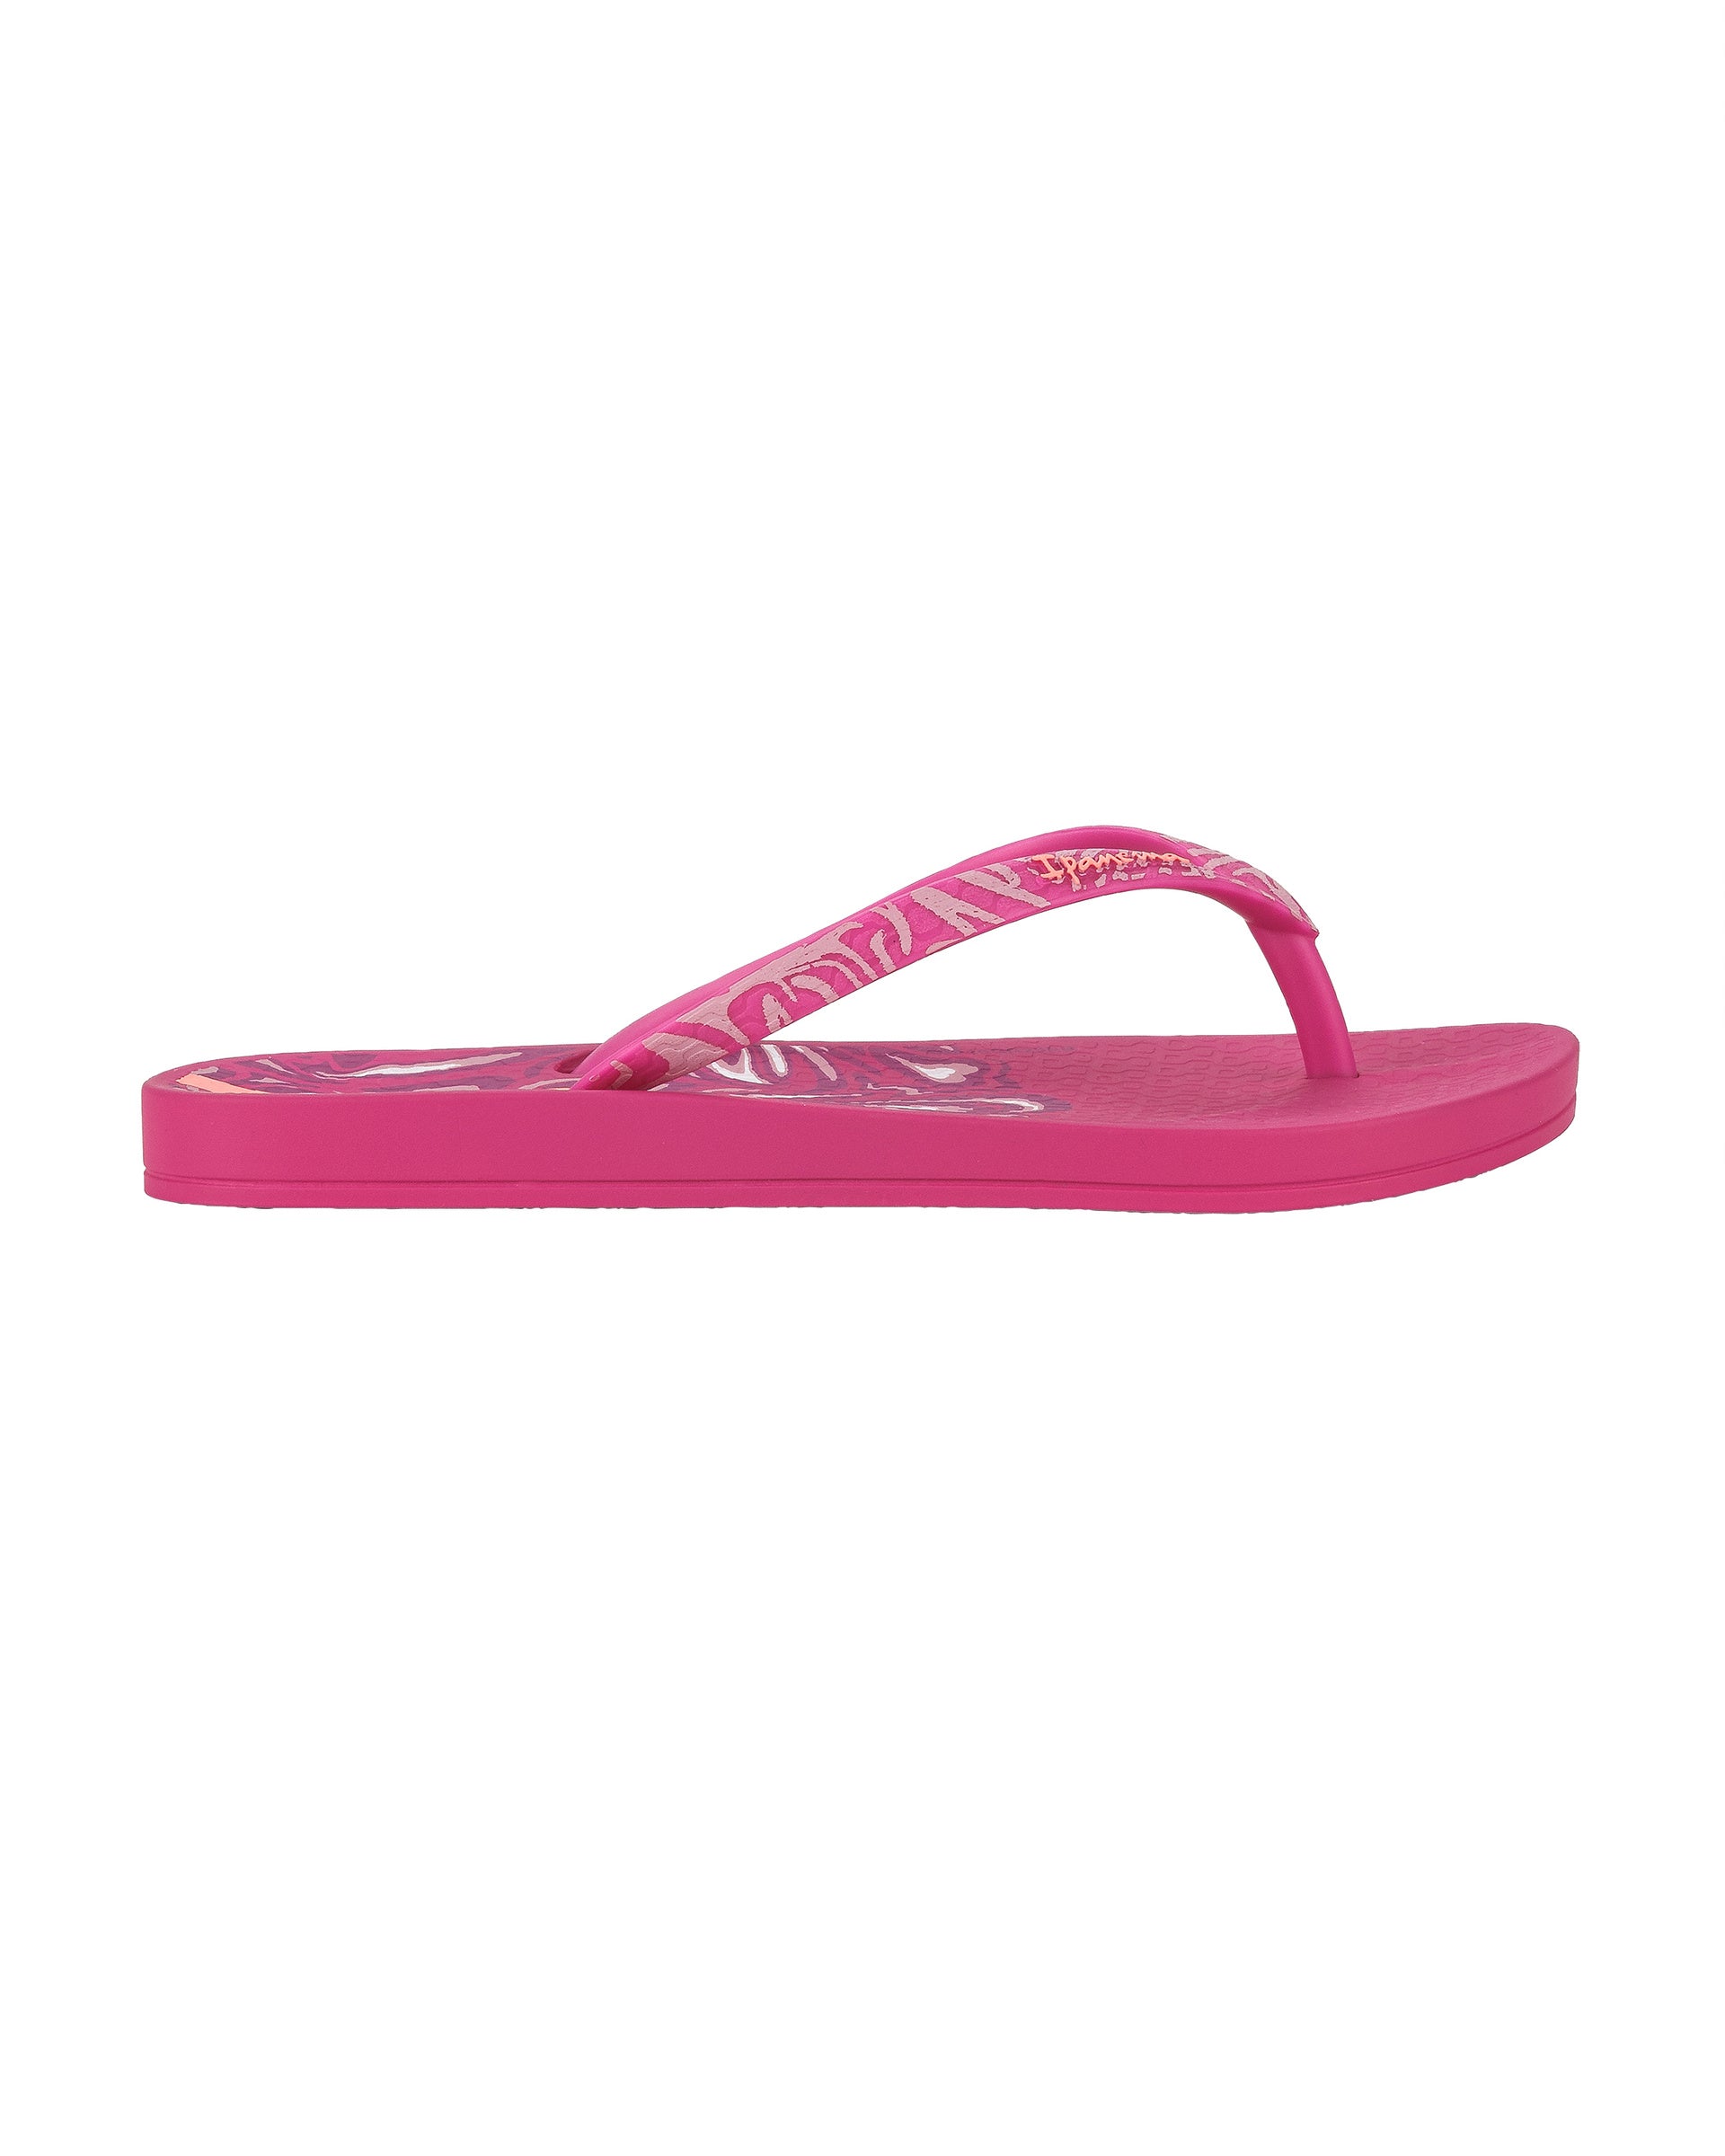 Outer side view of a pink Ipanema Nostalgic Hearts kid's flip flop with heart outlines on insole and strap.